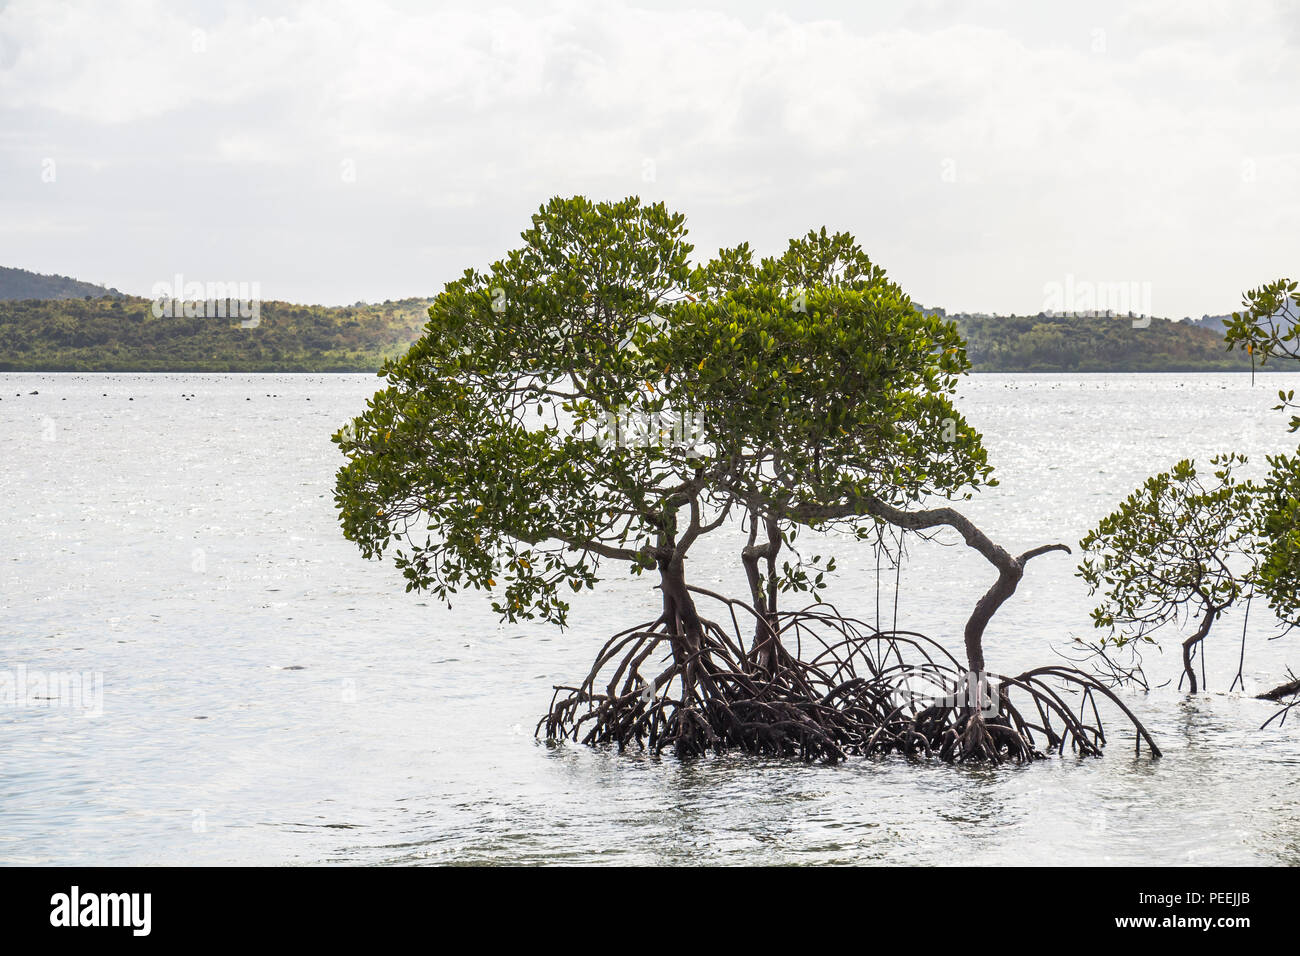 Mangrove tree in the sea water, philippines Stock Photo